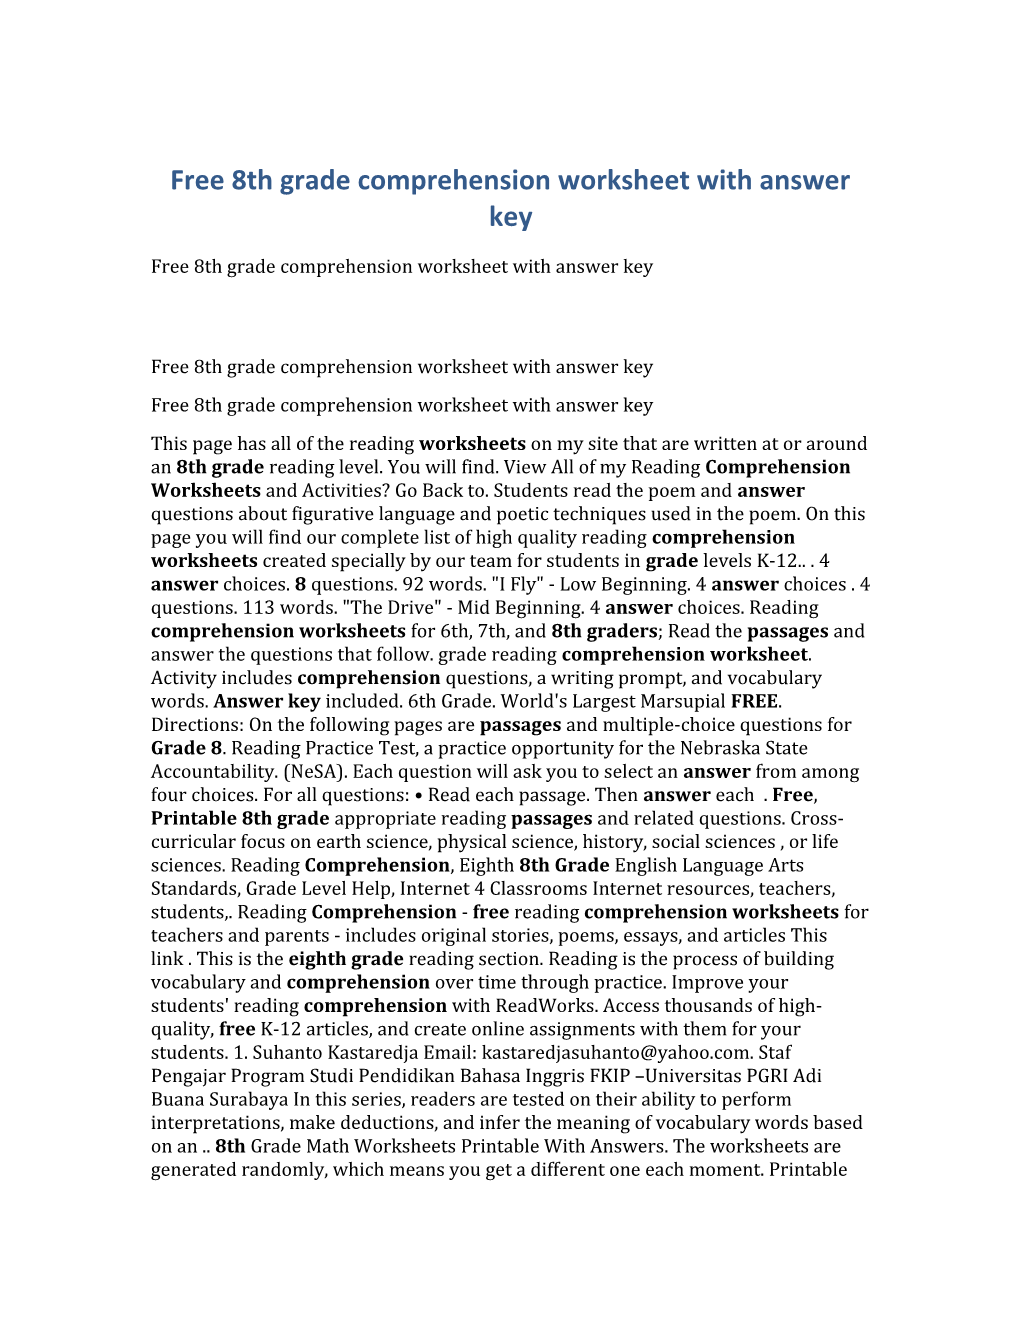 Free 8Th Grade Comprehension Worksheet with Answer Key